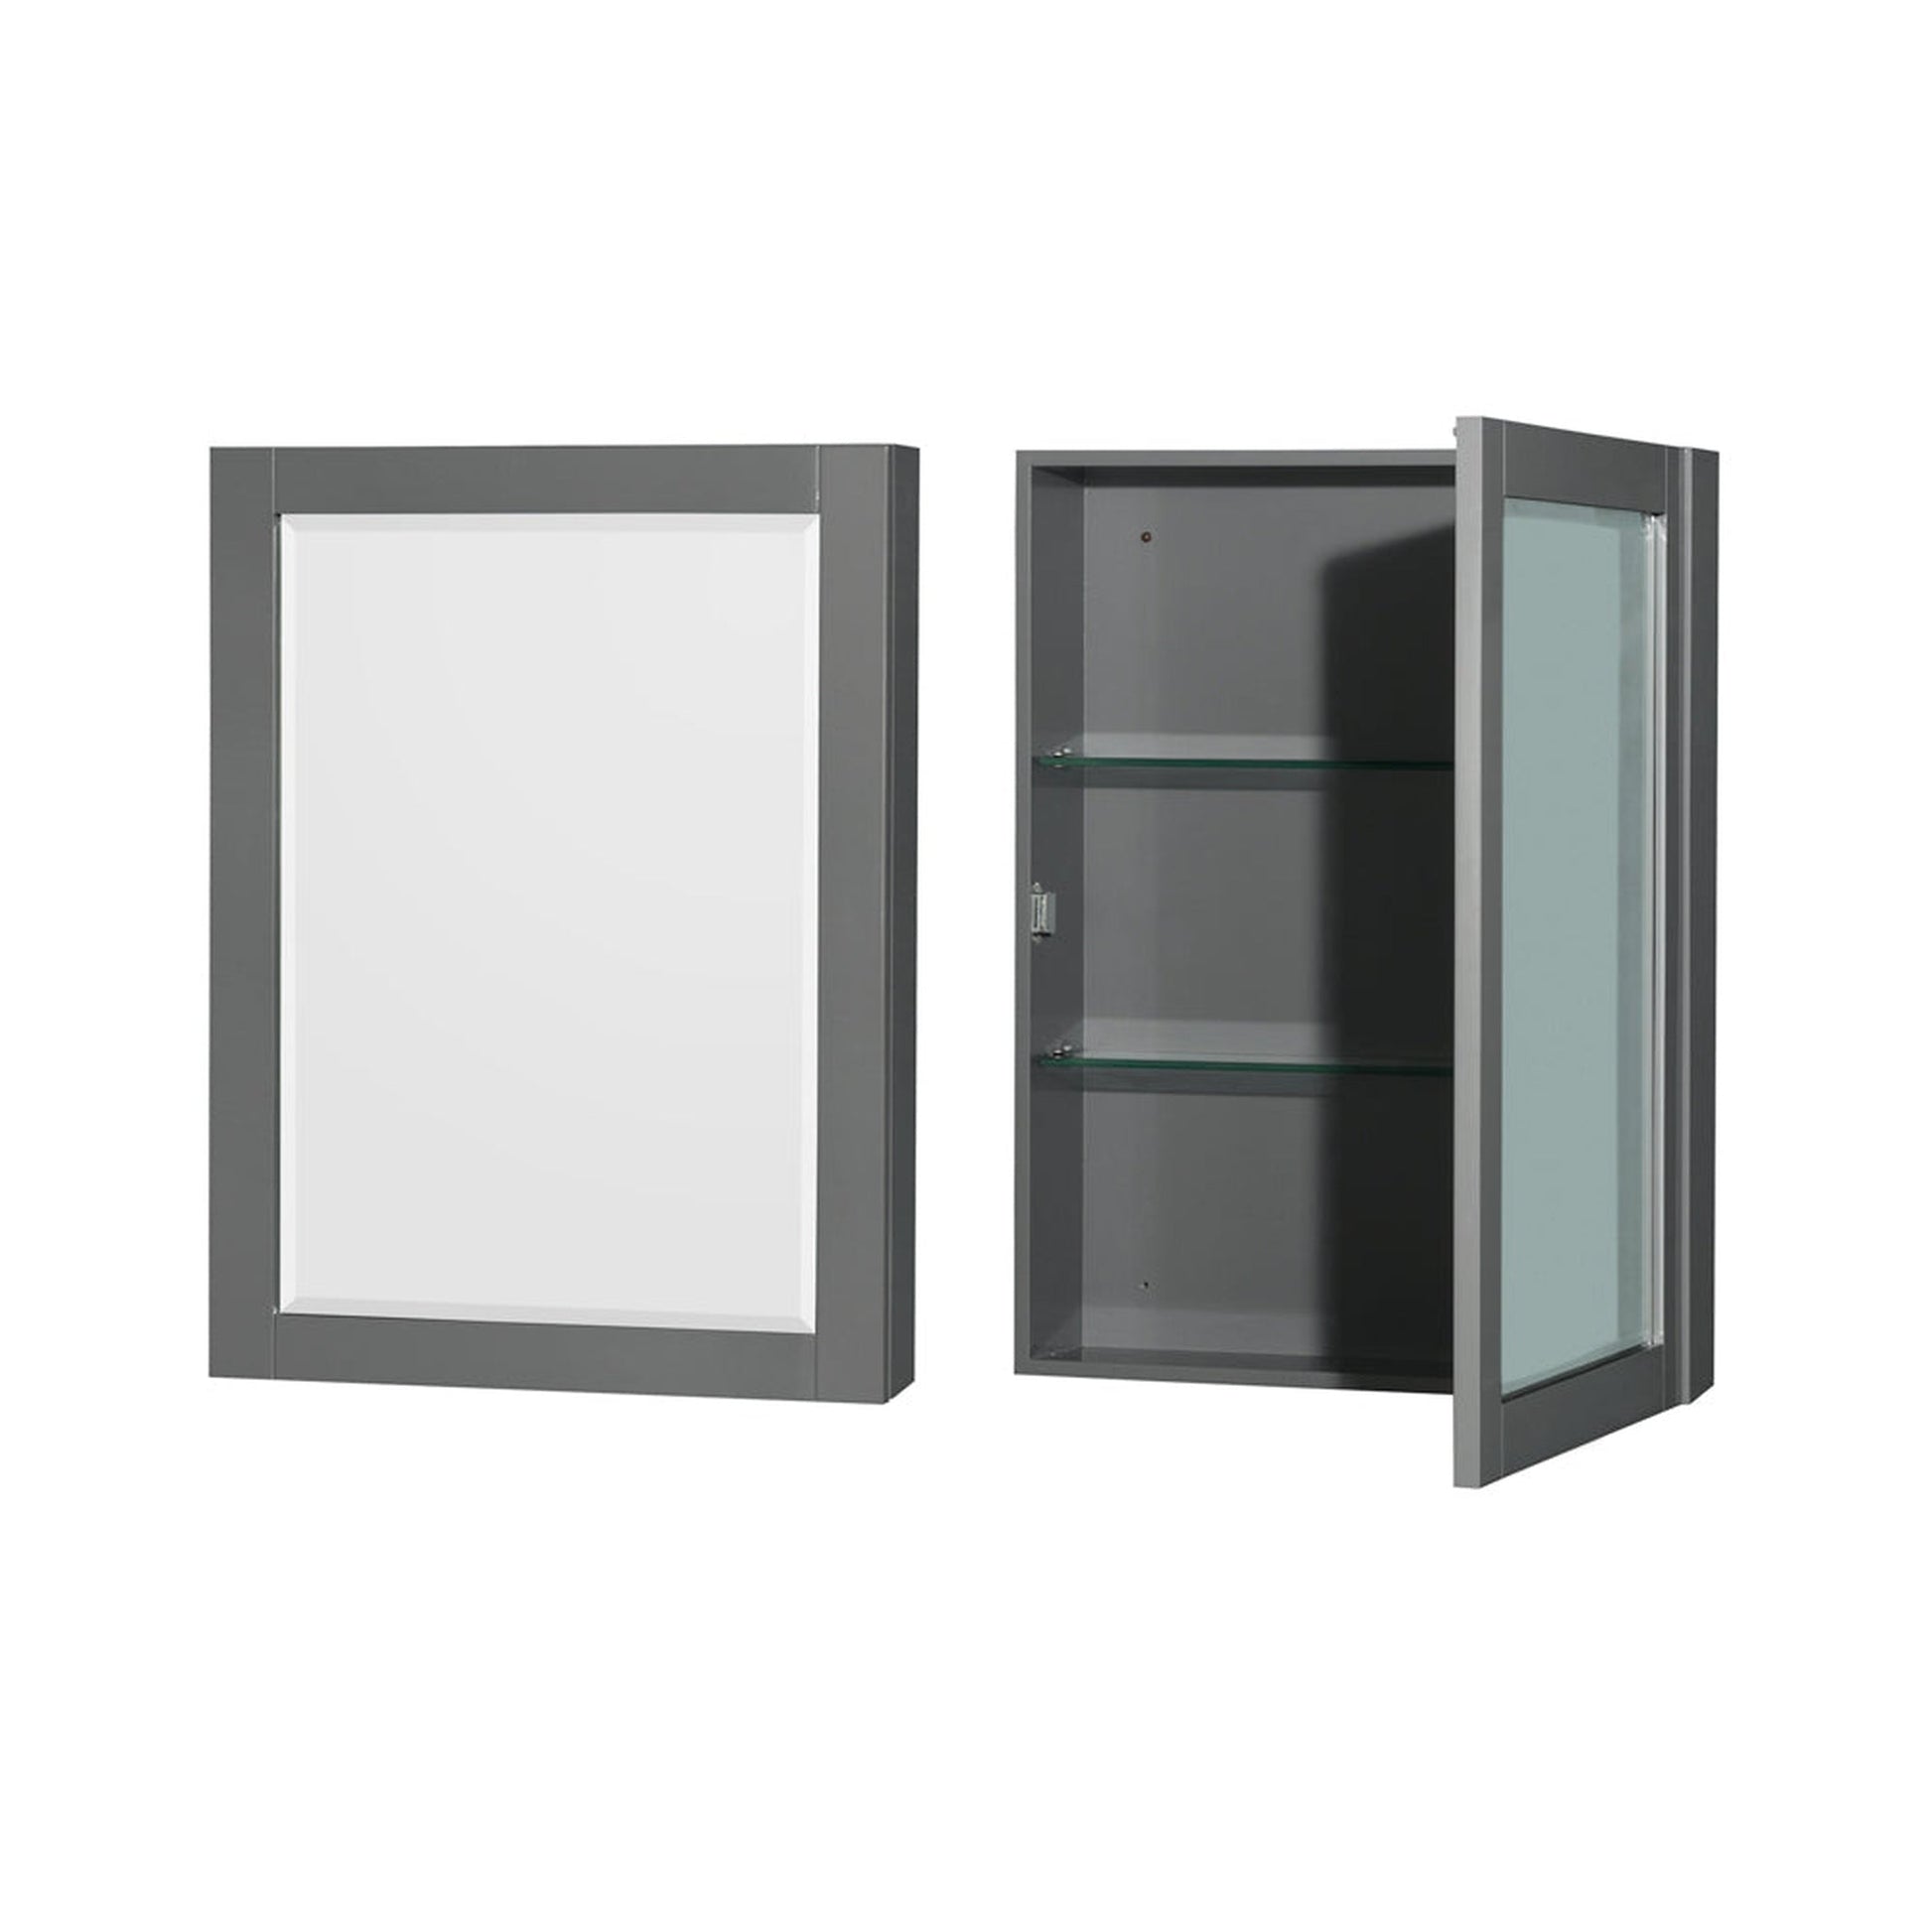 Wyndham Collection Sheffield 80" Double Bathroom Vanity in Dark Gray, White Cultured Marble Countertop, Undermount Square Sinks, Medicine Cabinet